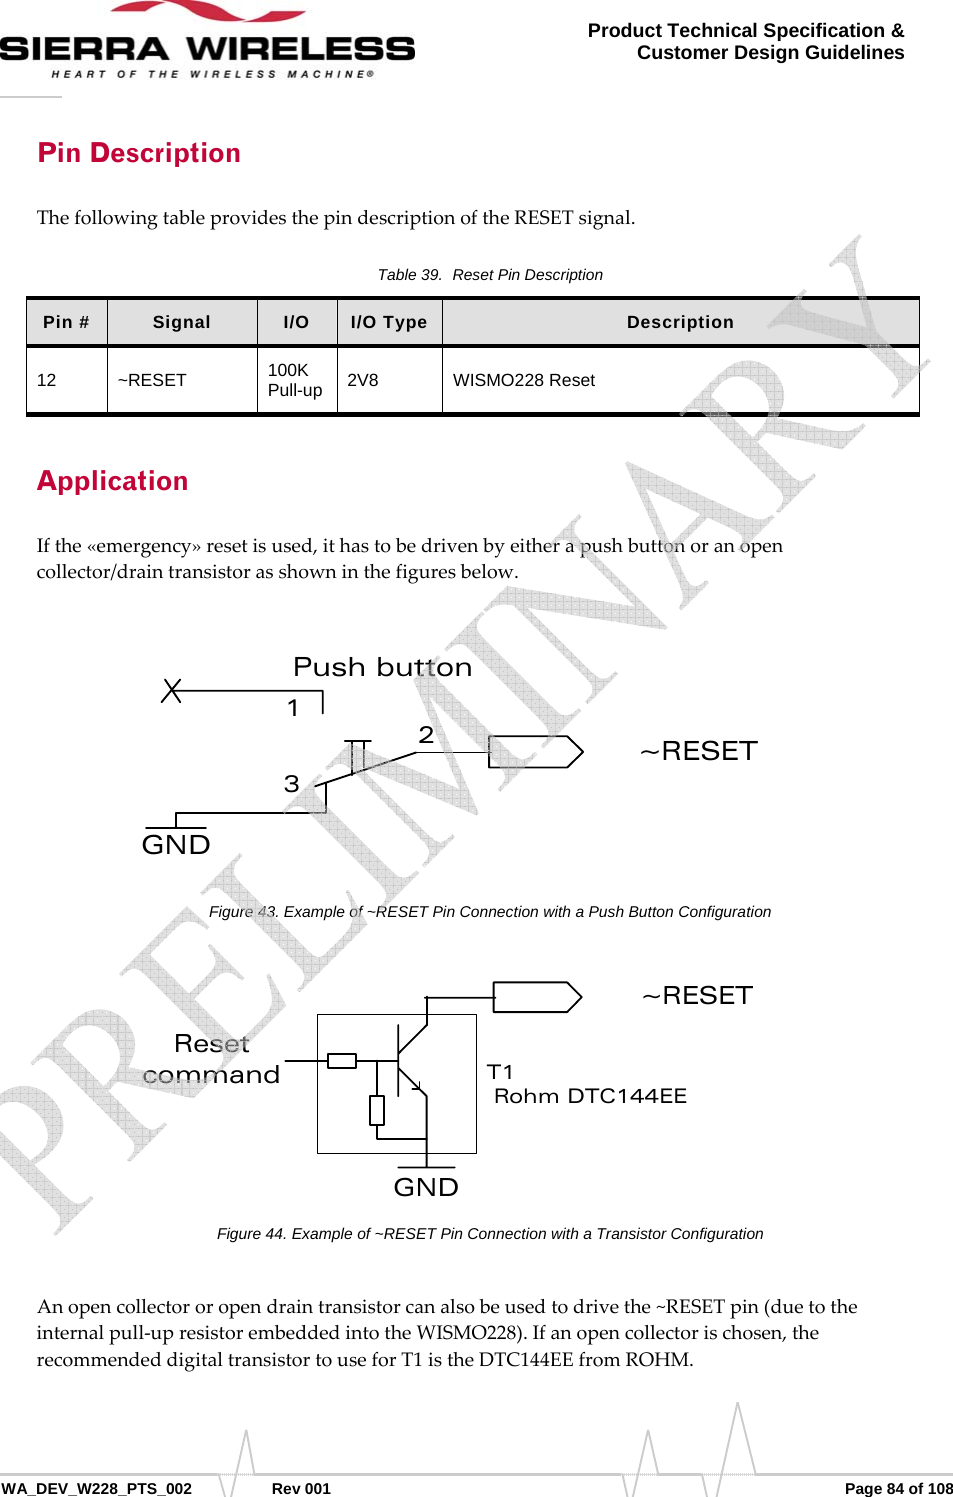      WA_DEV_W228_PTS_002 Rev 001  Page 84 of 108 Product Technical Specification &amp; Customer Design Guidelines Pin Description ThefollowingtableprovidesthepindescriptionoftheRESETsignal.Table 39.  Reset Pin Description Pin #  Signal  I/O  I/O Type  Description 12 ~RESET  100K Pull-up   2V8   WISMO228 Reset Application Ifthe«emergency»resetisused,ithastobedrivenbyeitherapushbuttonoranopencollector/draintransistorasshowninthefiguresbelow.GND123Push button~RESETFigure 43. Example of ~RESET Pin Connection with a Push Button Configuration GND~RESETResetcommand T1 Rohm DTC144EEFigure 44. Example of ~RESET Pin Connection with a Transistor Configuration Anopencollectororopendraintransistorcanalsobeusedtodrivethe~RESETpin(duetotheinternalpull‐upresistorembeddedintotheWISMO228).Ifanopencollectorischosen,therecommendeddigitaltransistortouseforT1istheDTC144EEfromROHM.   